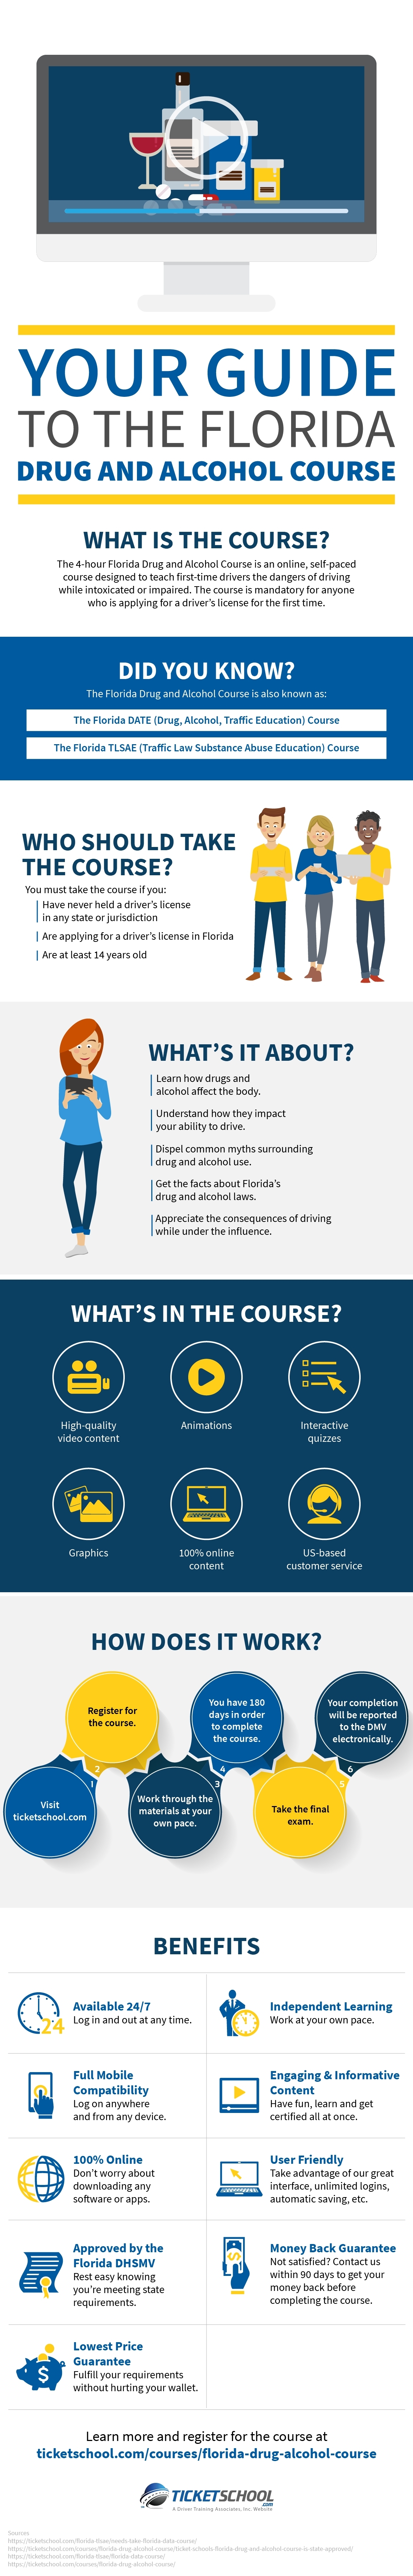 Your Guide to the Florida Drug and Alcohol Course